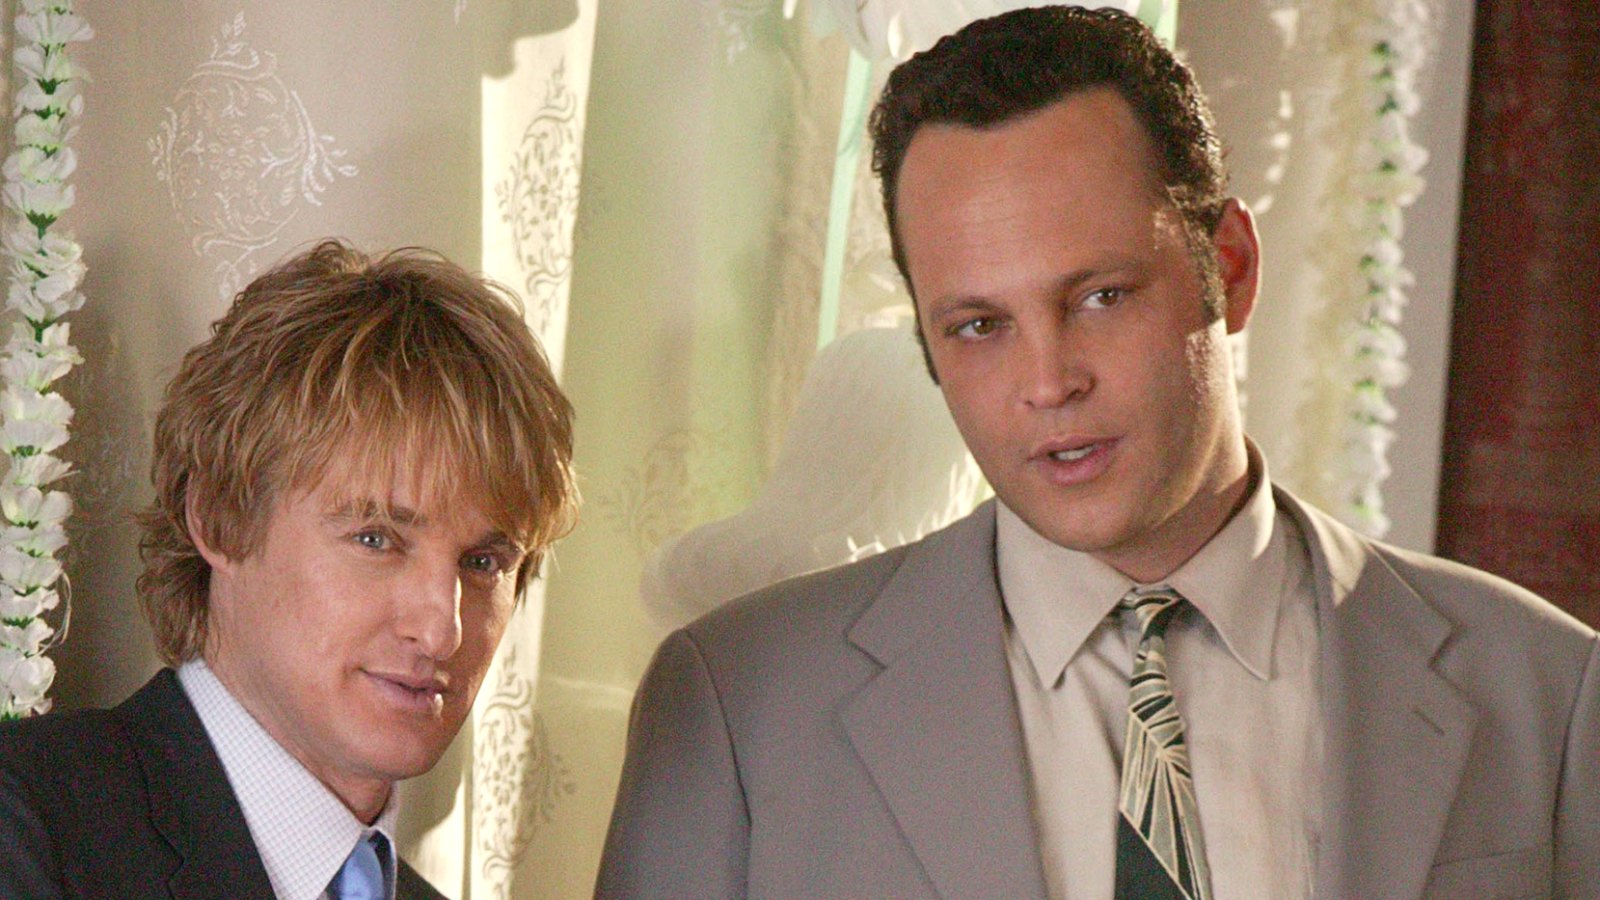 Owen Wilson Reveals What It’ll Take for a ‘Wedding Crashers’ Sequel With Vince Vaughn